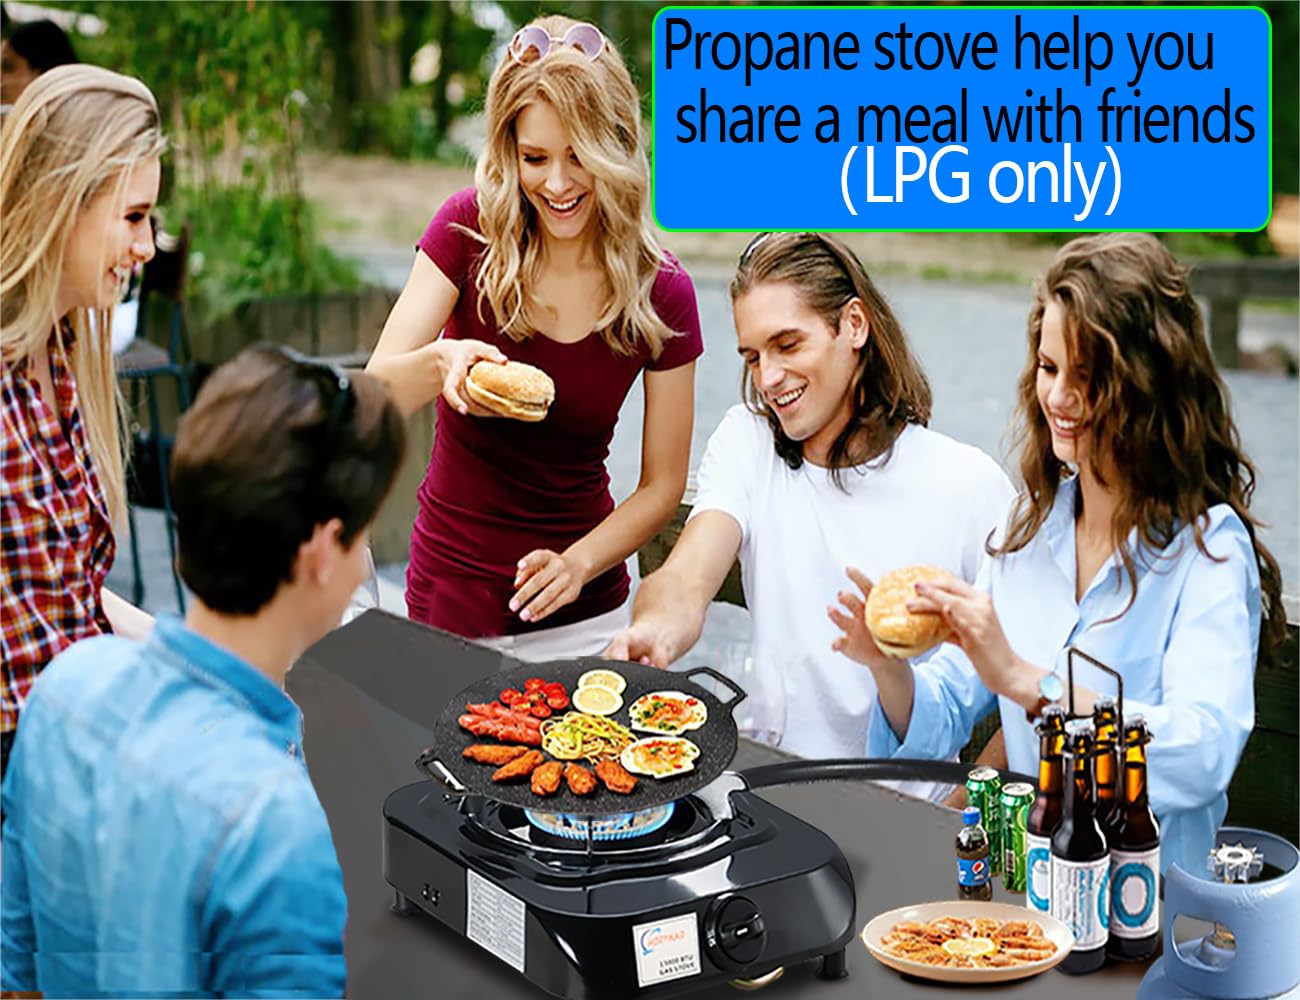 Horynar Single Burner Propane Stove with Propane Adapter Hose 13000 BTU Smart Switch Protection for Children. Portable, Unique Body Integrated Design